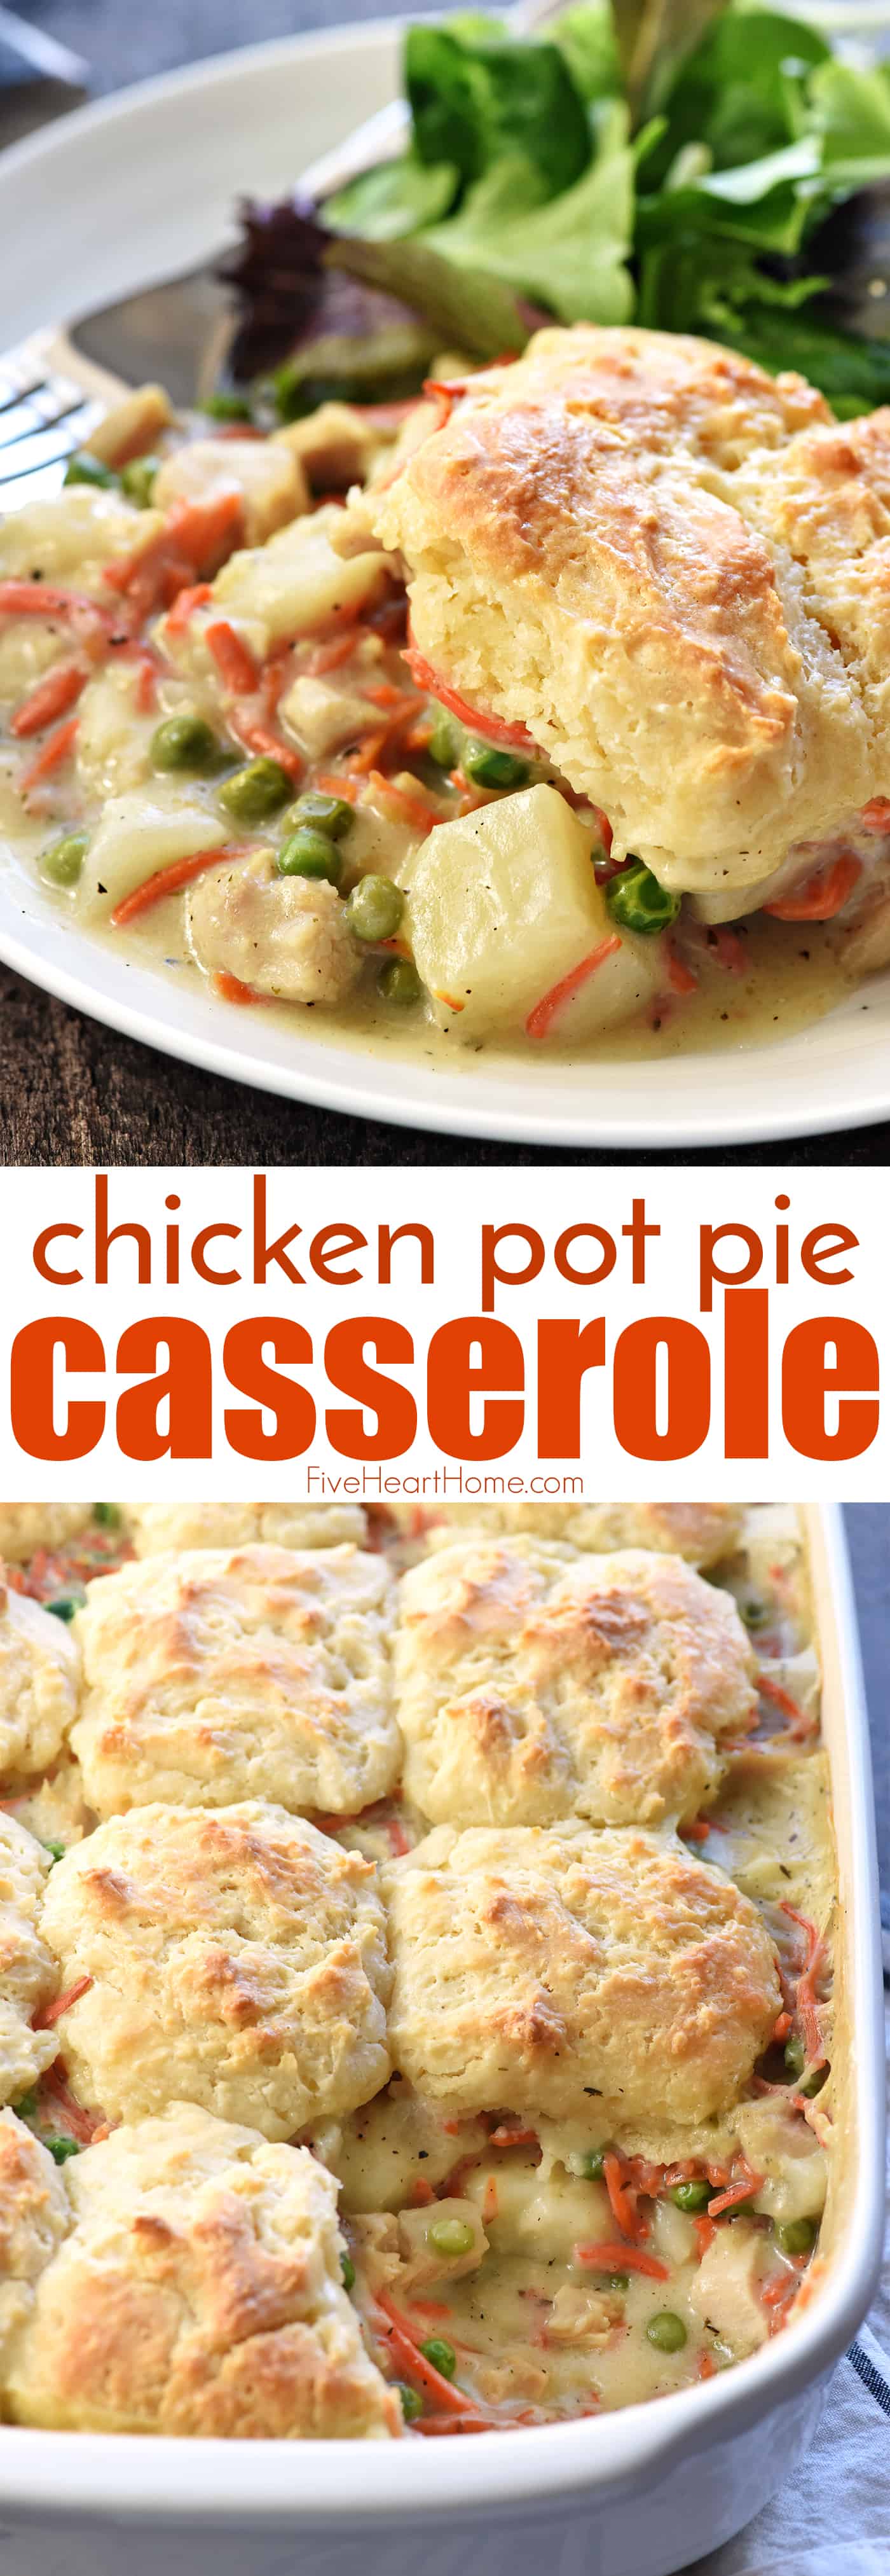 Chicken Pot Pie Casserole ~ this easy comfort food recipe features a classic filling of tender chicken, potatoes, carrots, and peas in a savory gravy topped with fluffy homemade drop biscuits! | FiveHeartHome.com via @fivehearthome